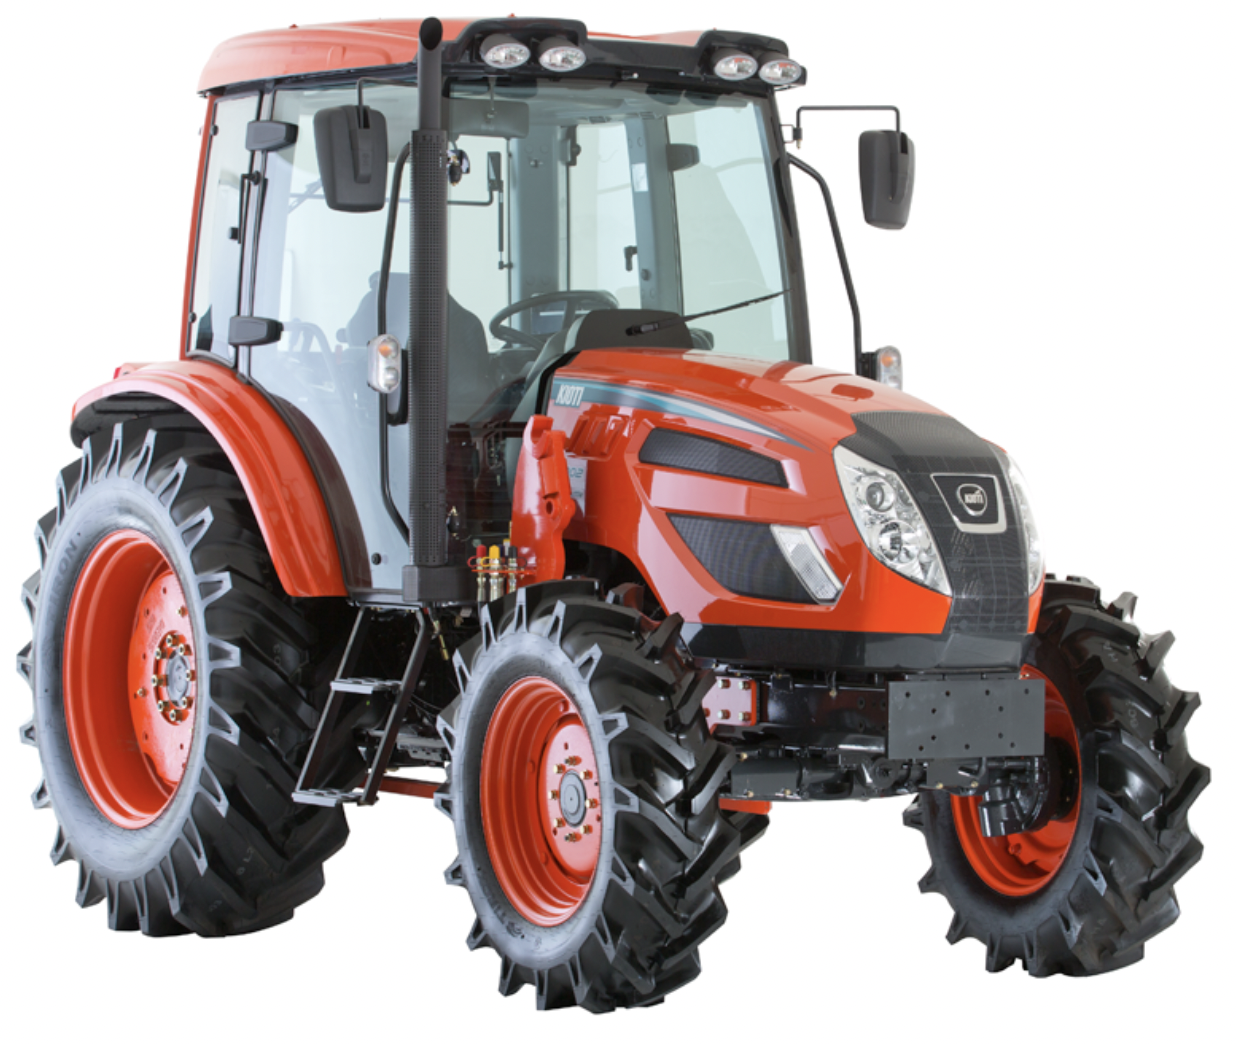 Utility tractors for sale such as Kioti's PX Series are suited to large acreage and commercial enterprises